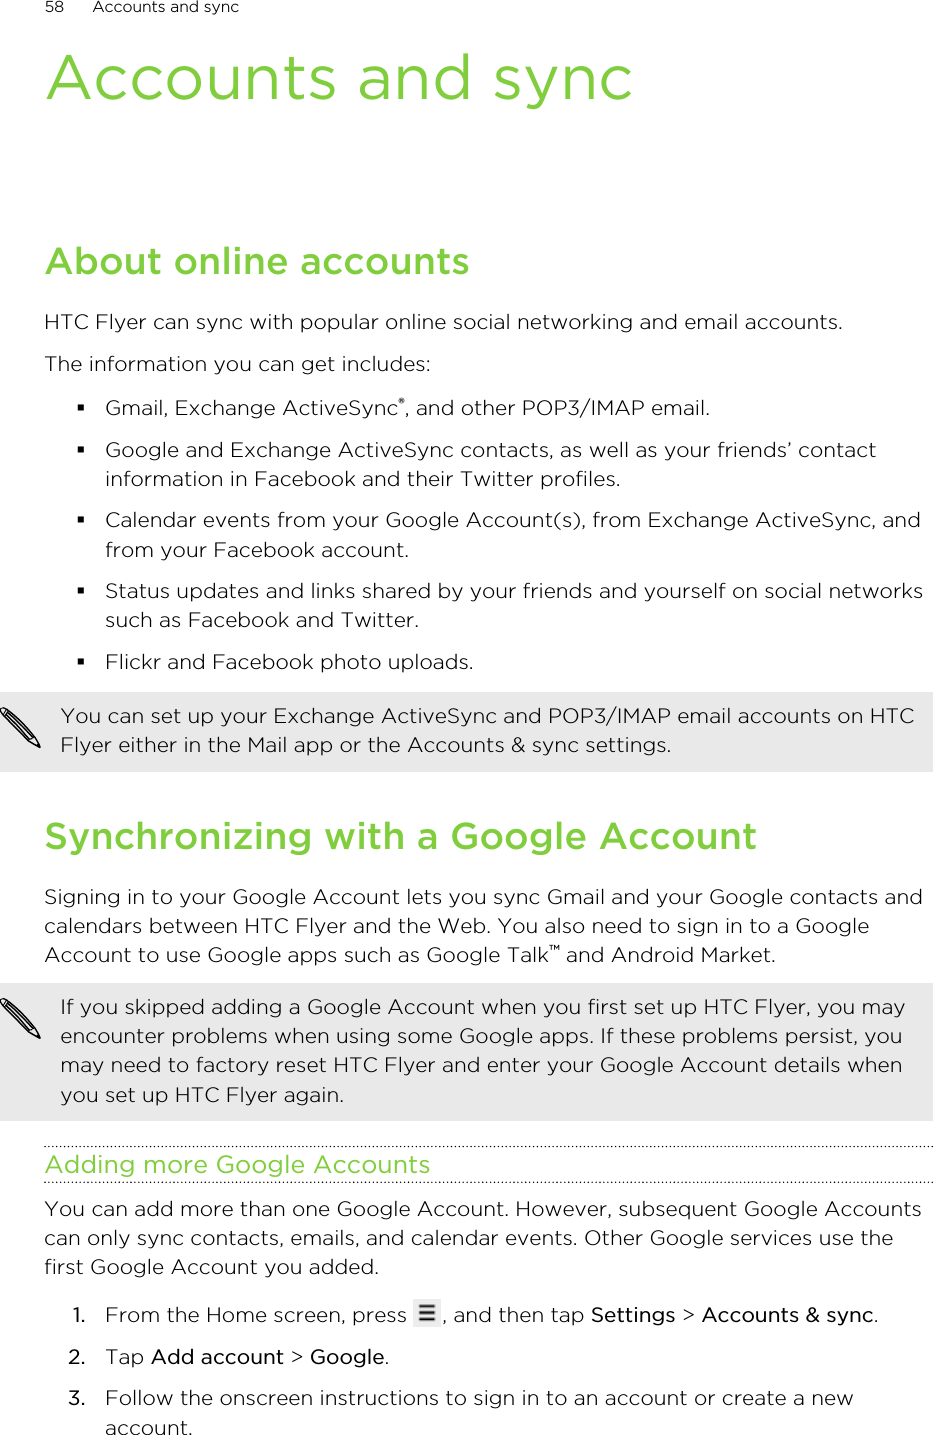 Accounts and syncAbout online accountsHTC Flyer can sync with popular online social networking and email accounts.The information you can get includes:§Gmail, Exchange ActiveSync®, and other POP3/IMAP email.§Google and Exchange ActiveSync contacts, as well as your friends’ contactinformation in Facebook and their Twitter profiles.§Calendar events from your Google Account(s), from Exchange ActiveSync, andfrom your Facebook account.§Status updates and links shared by your friends and yourself on social networkssuch as Facebook and Twitter.§Flickr and Facebook photo uploads.You can set up your Exchange ActiveSync and POP3/IMAP email accounts on HTCFlyer either in the Mail app or the Accounts &amp; sync settings.Synchronizing with a Google AccountSigning in to your Google Account lets you sync Gmail and your Google contacts andcalendars between HTC Flyer and the Web. You also need to sign in to a GoogleAccount to use Google apps such as Google Talk™ and Android Market.If you skipped adding a Google Account when you first set up HTC Flyer, you mayencounter problems when using some Google apps. If these problems persist, youmay need to factory reset HTC Flyer and enter your Google Account details whenyou set up HTC Flyer again.Adding more Google AccountsYou can add more than one Google Account. However, subsequent Google Accountscan only sync contacts, emails, and calendar events. Other Google services use thefirst Google Account you added.1. From the Home screen, press  , and then tap Settings &gt; Accounts &amp; sync.2. Tap Add account &gt; Google.3. Follow the onscreen instructions to sign in to an account or create a newaccount.58 Accounts and sync